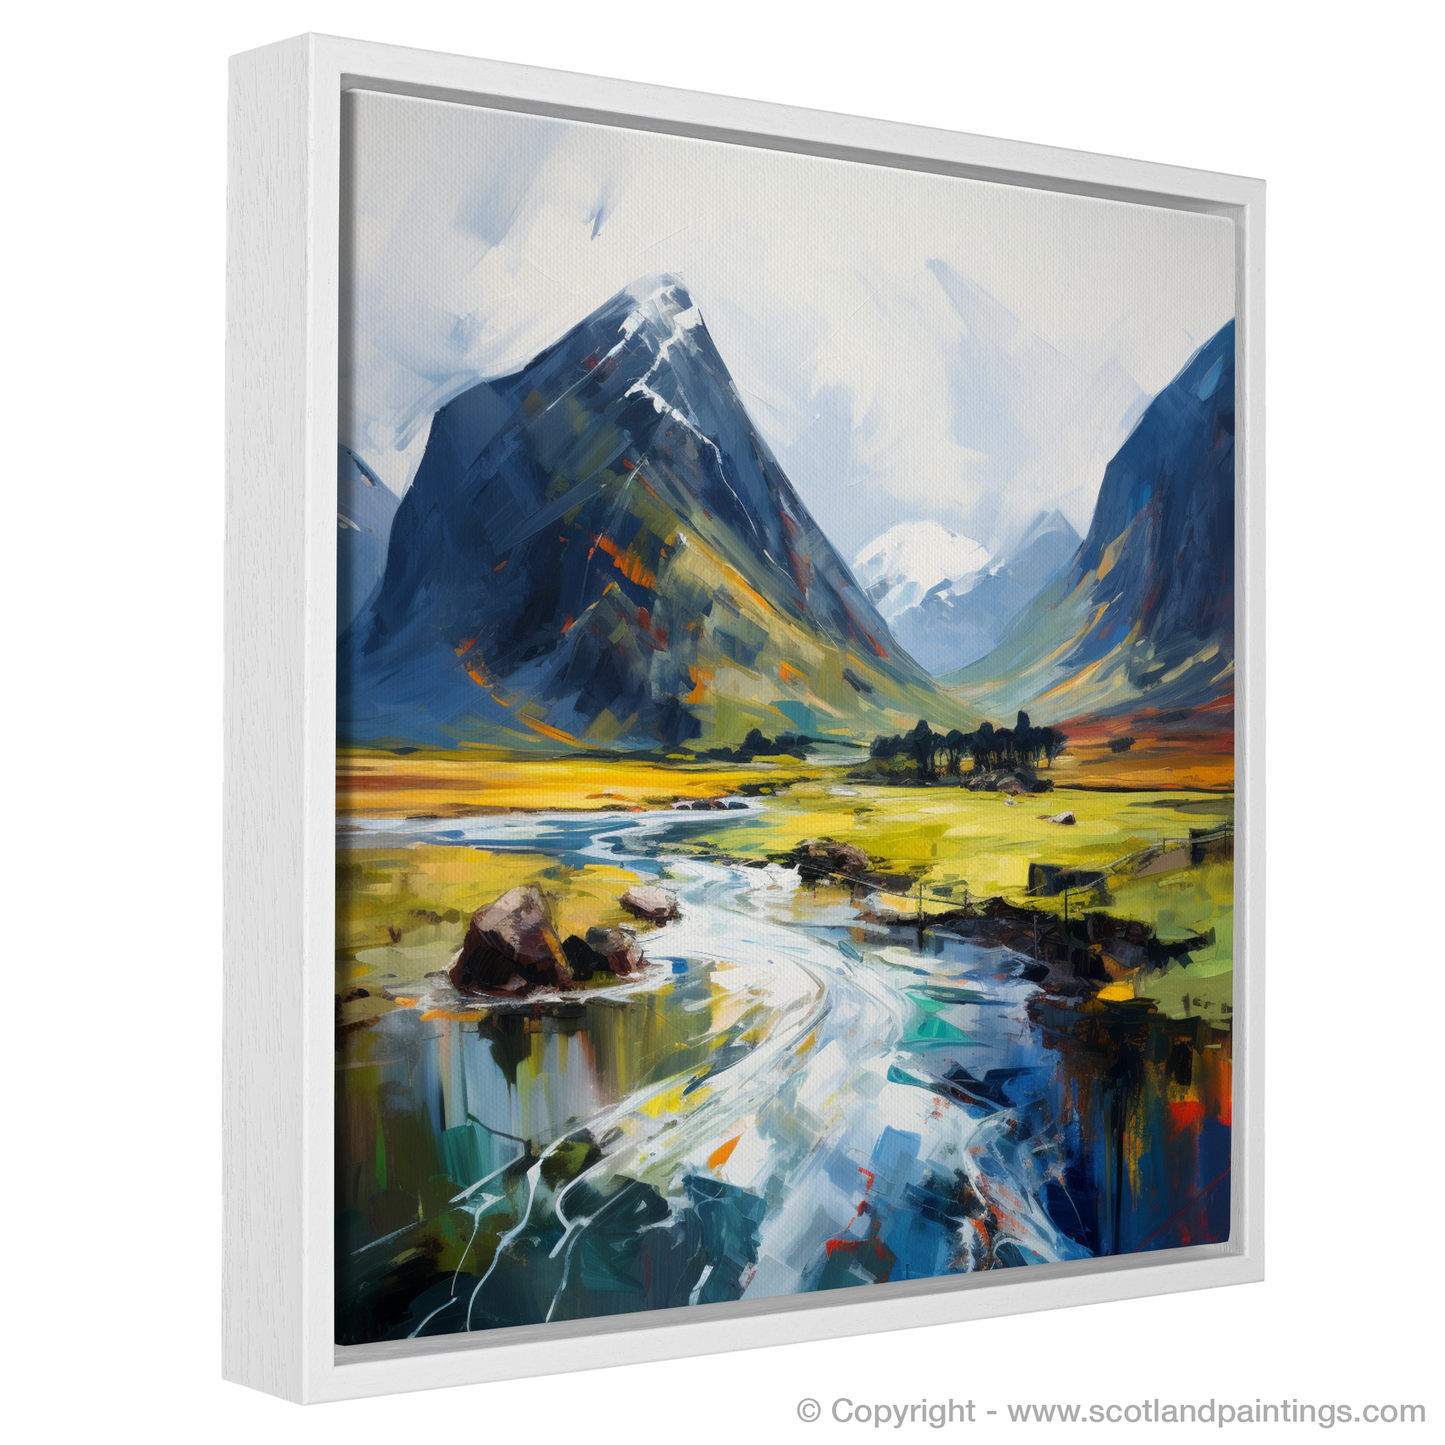 Painting and Art Print of Glencoe, Argyll and Bute entitled "Glencoe's Fiery Embrace: An Expressionist Ode to the Scottish Highlands".